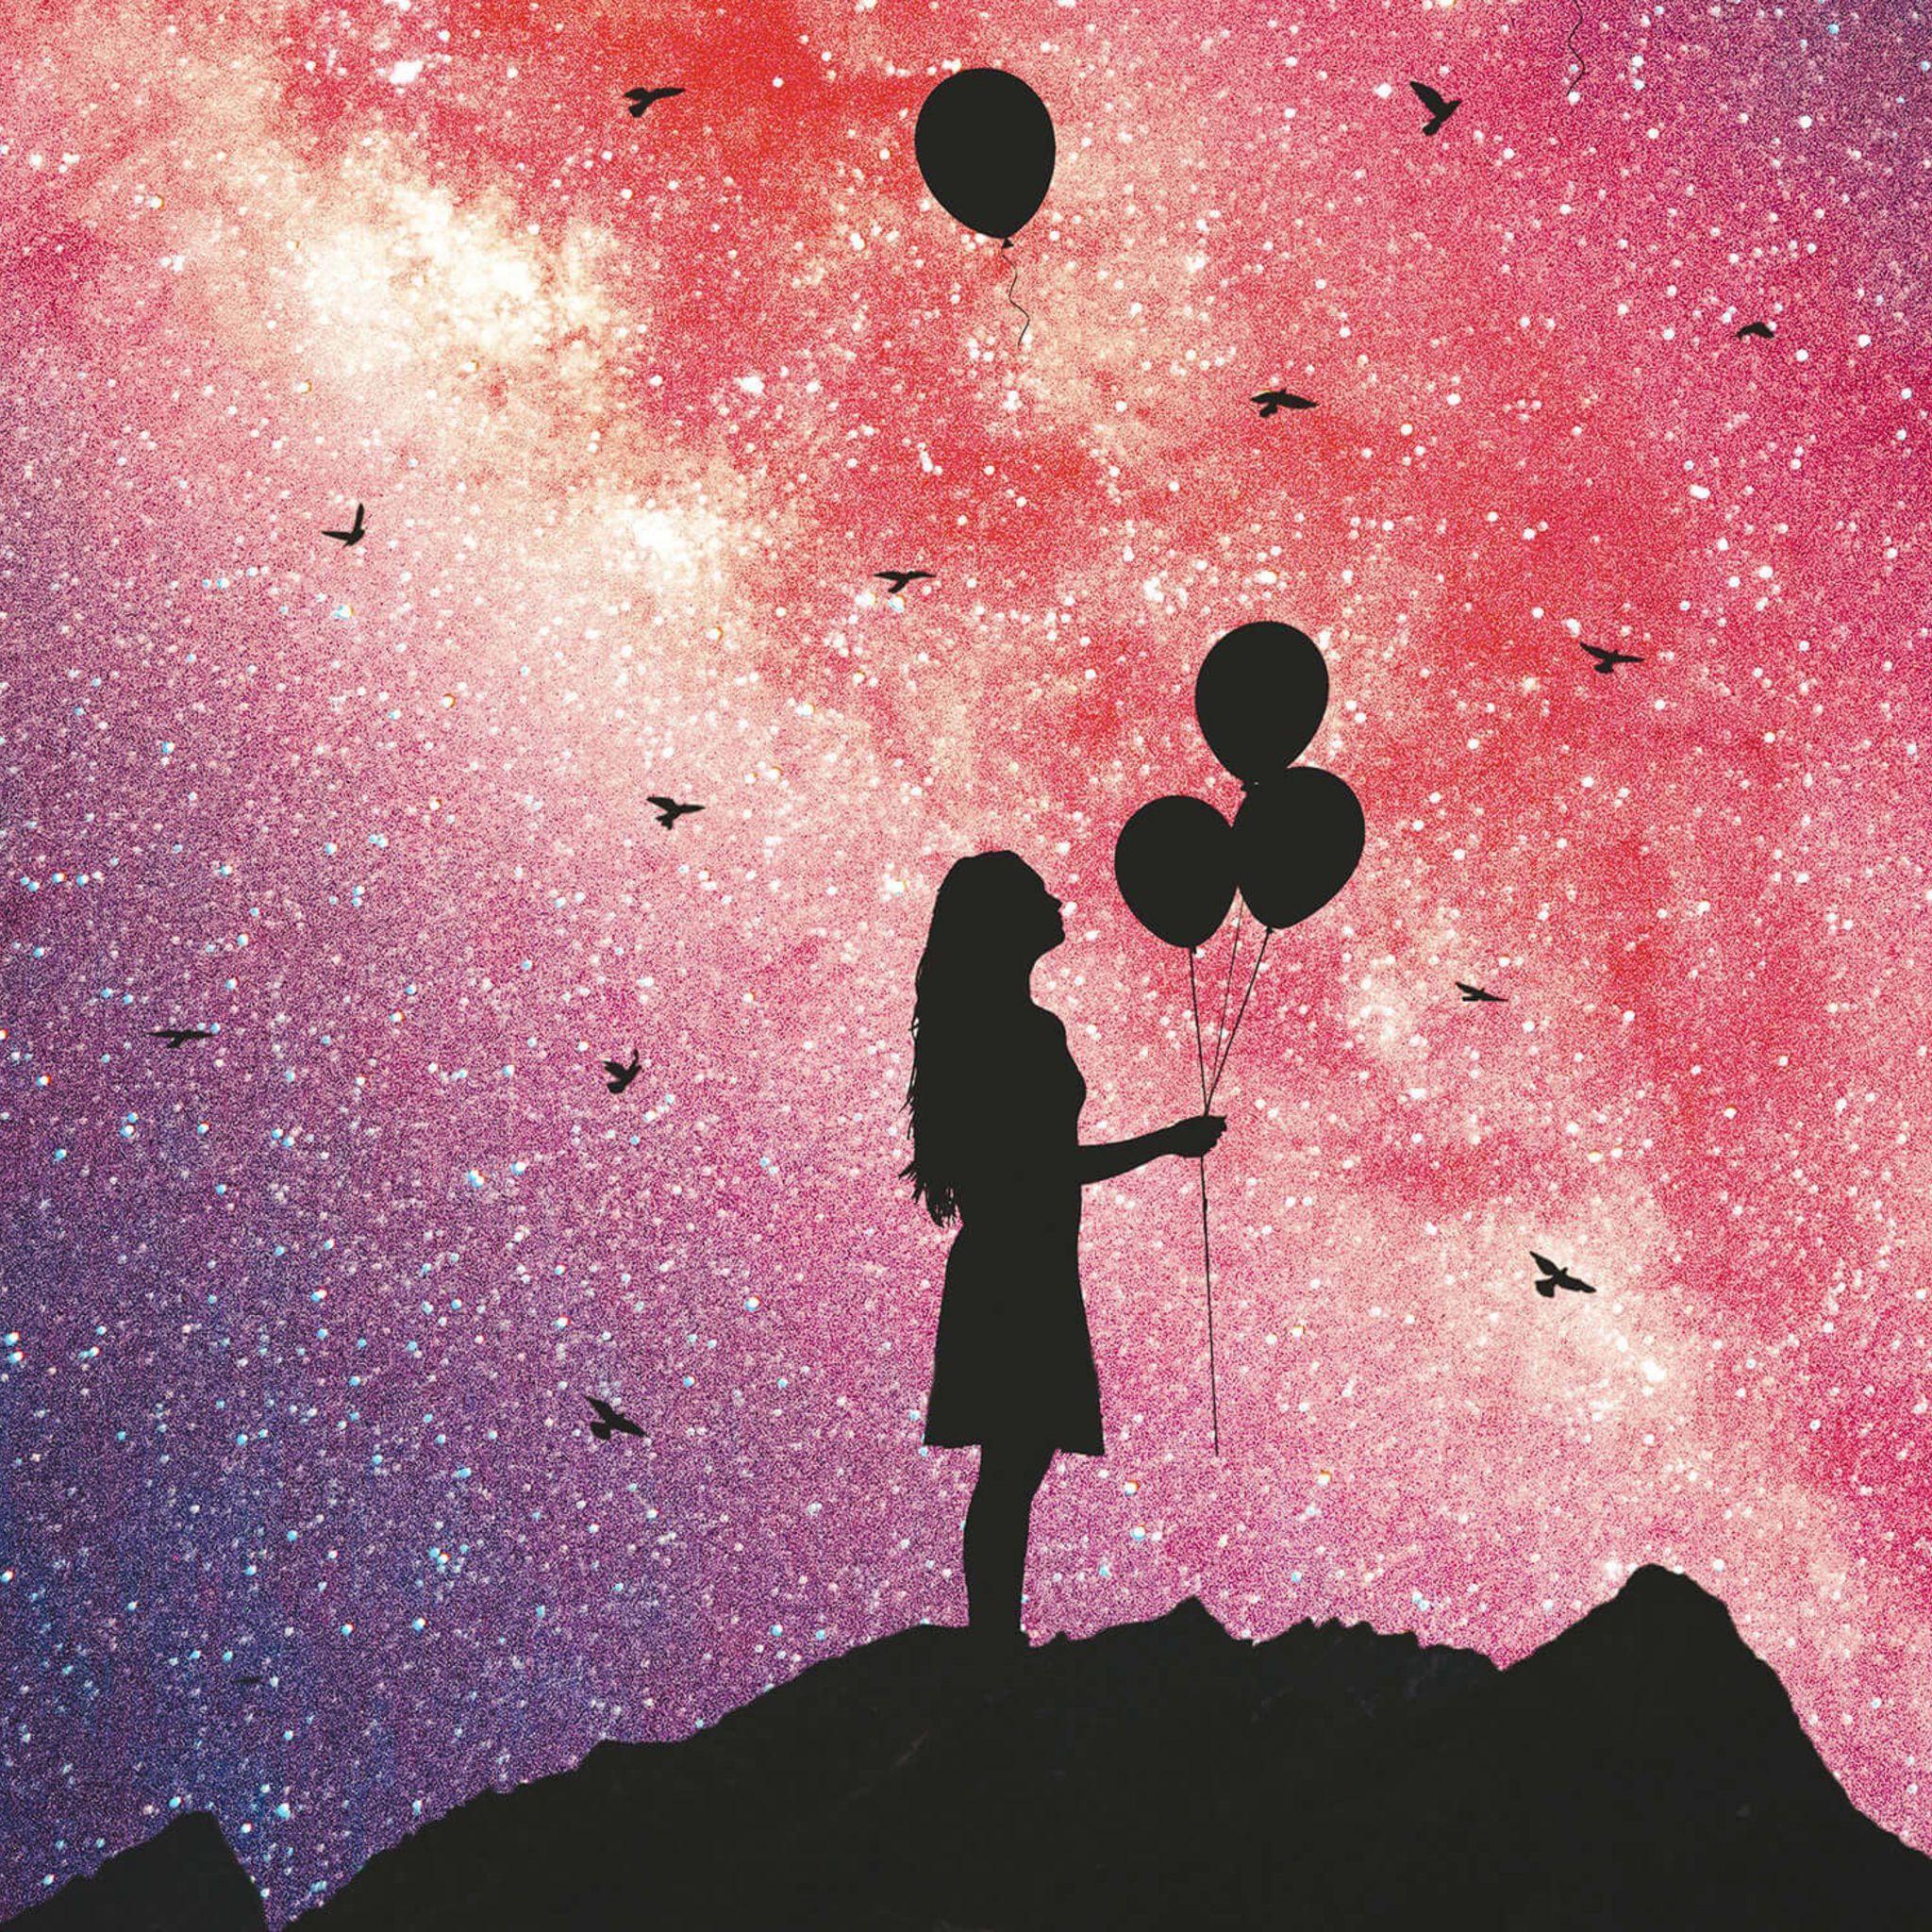 Girl holding balloons in front of a starry sky. - Balloons